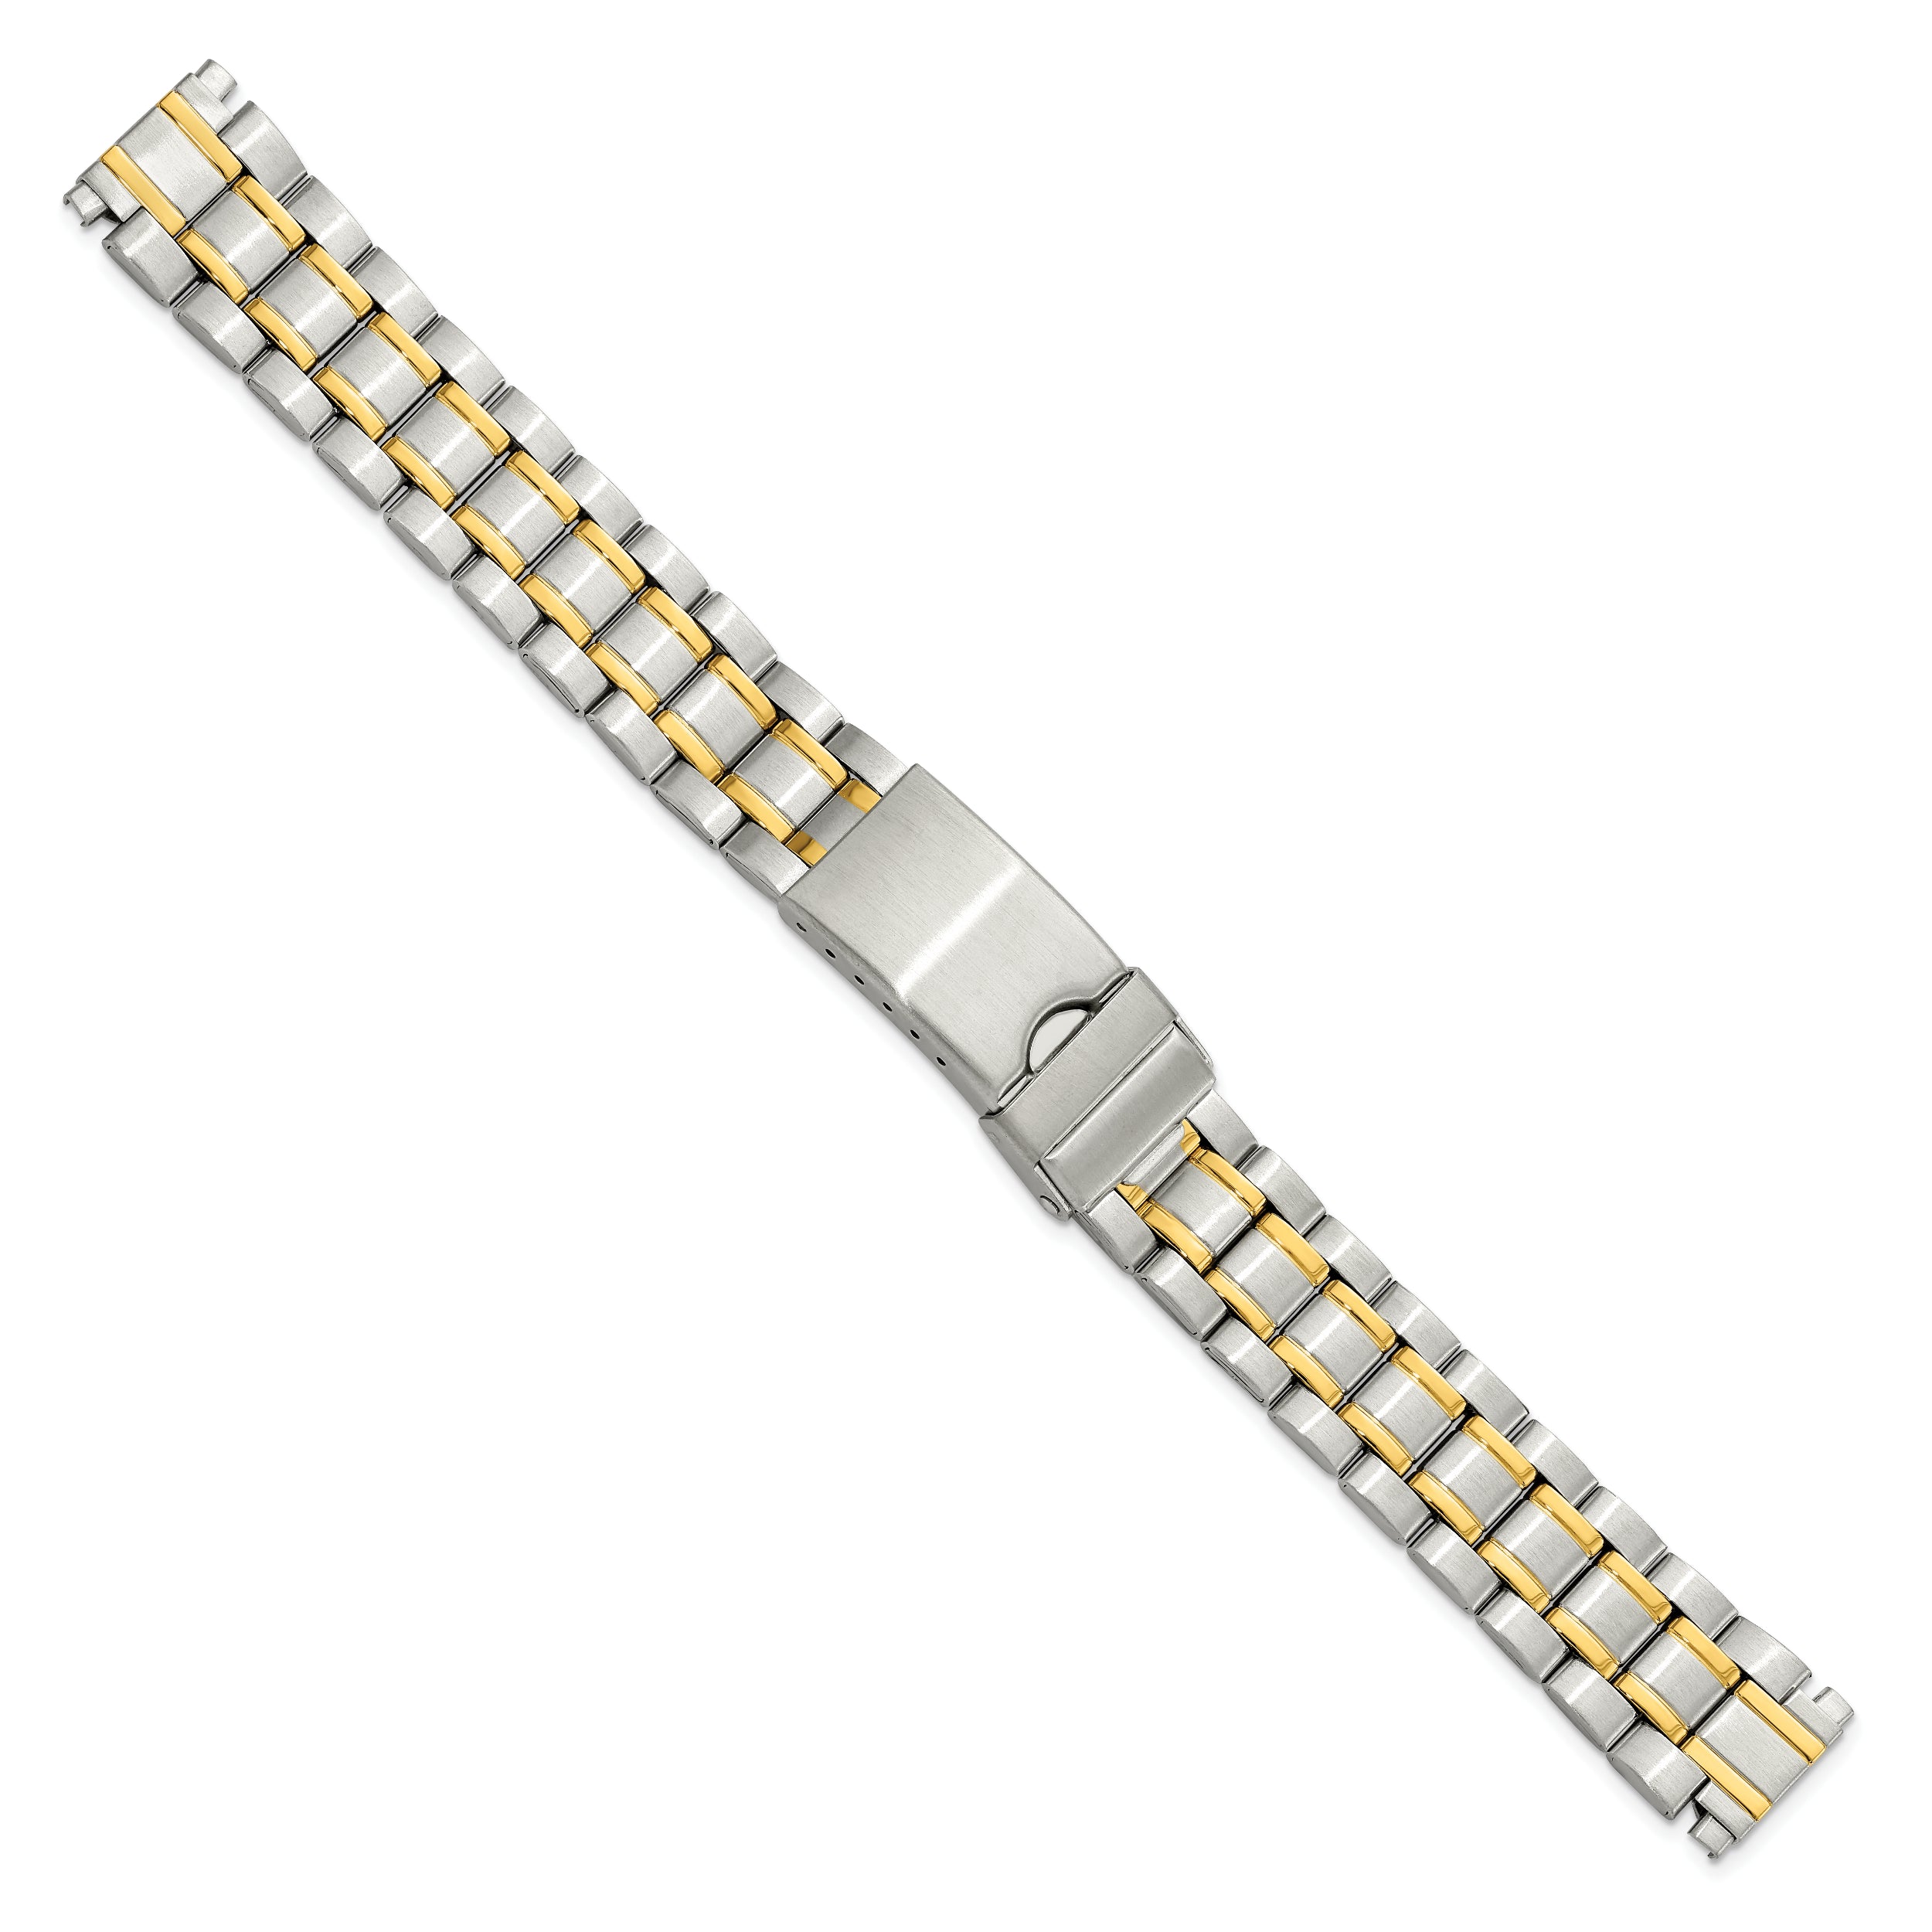 12-16mm Ladies Satin and Polished Two-tone Stainless Steel Oyster-Style with Deployment Buckle 7 inch Watch Band